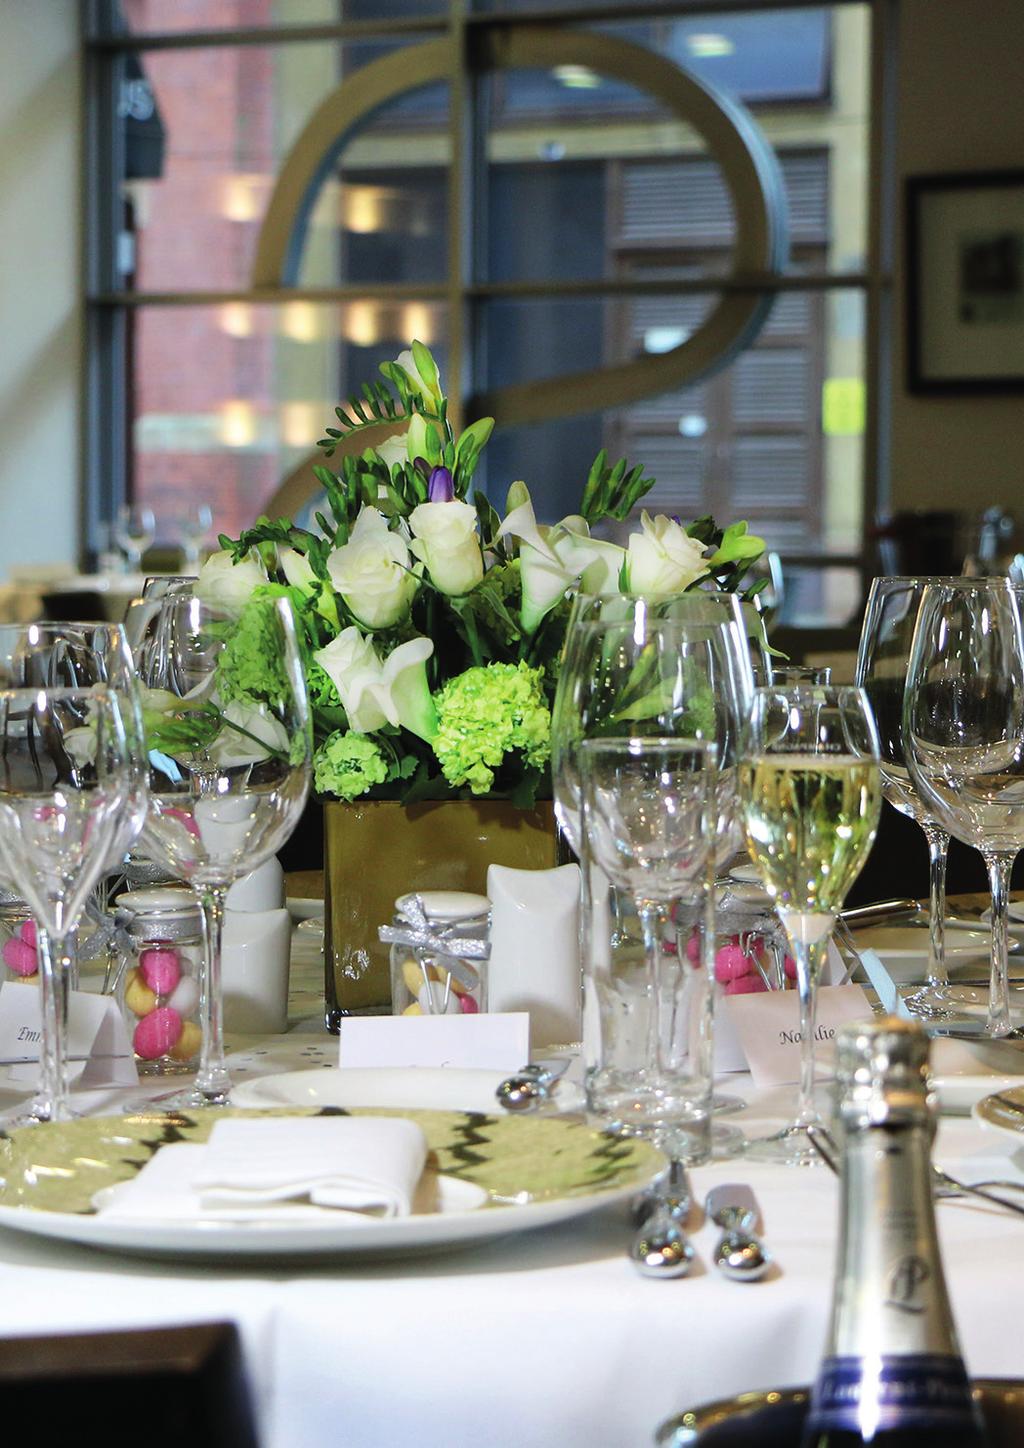 WEDDINGS WEDDINGS Our restaurant is ideal for wedding receptions, rehearsal dinners and wedding breakfasts offering celebrations tailored to your vision.